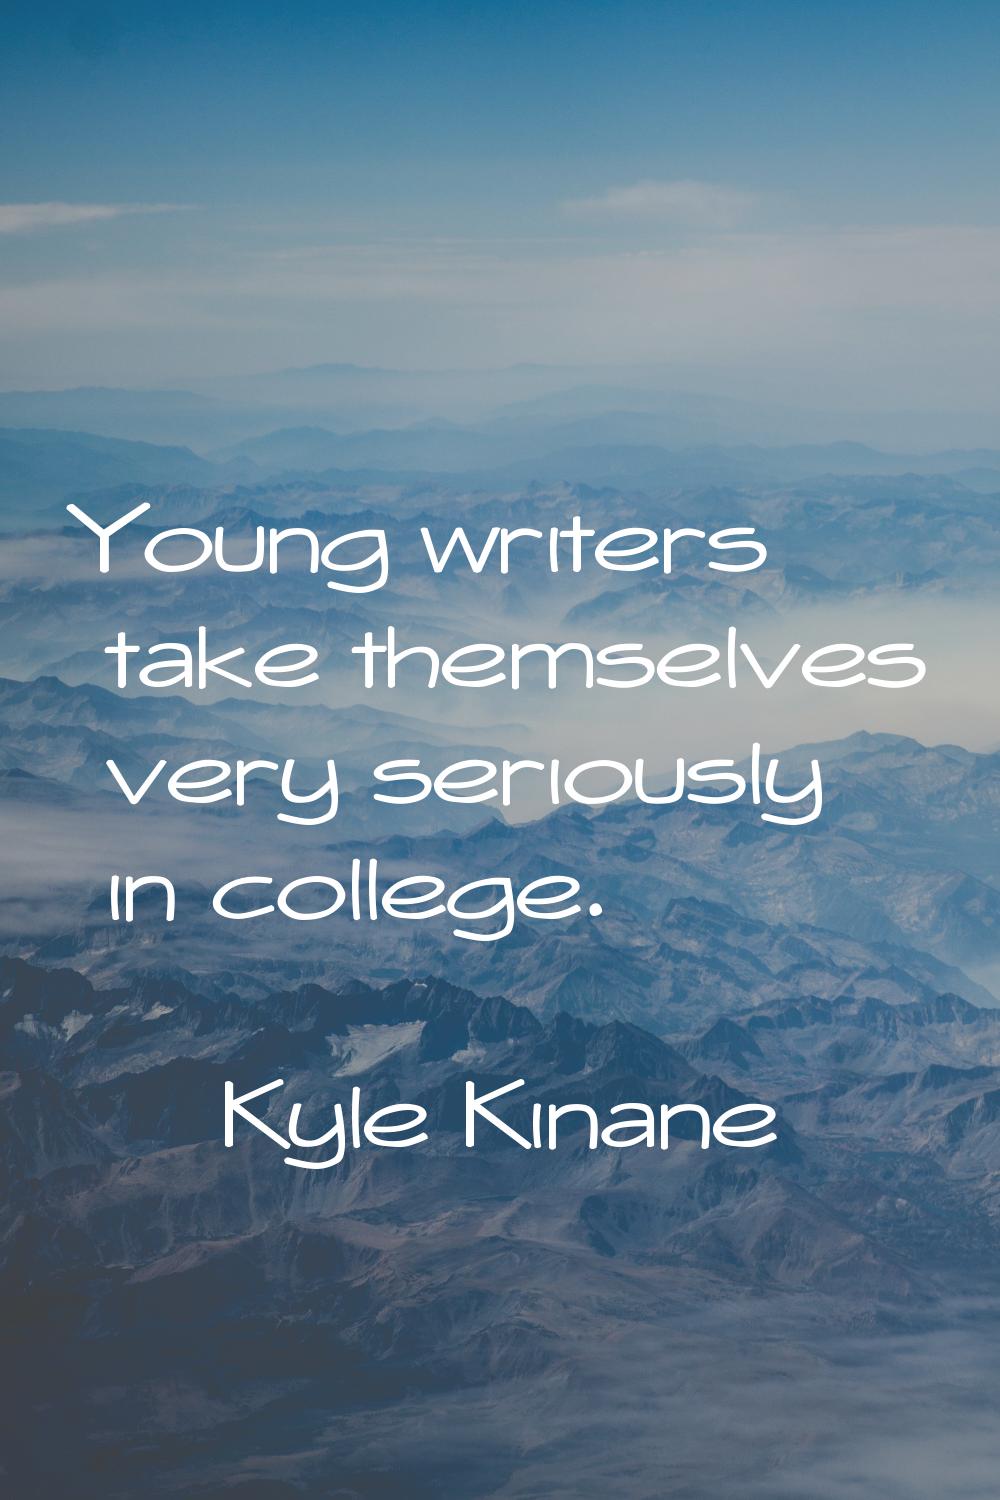 Young writers take themselves very seriously in college.